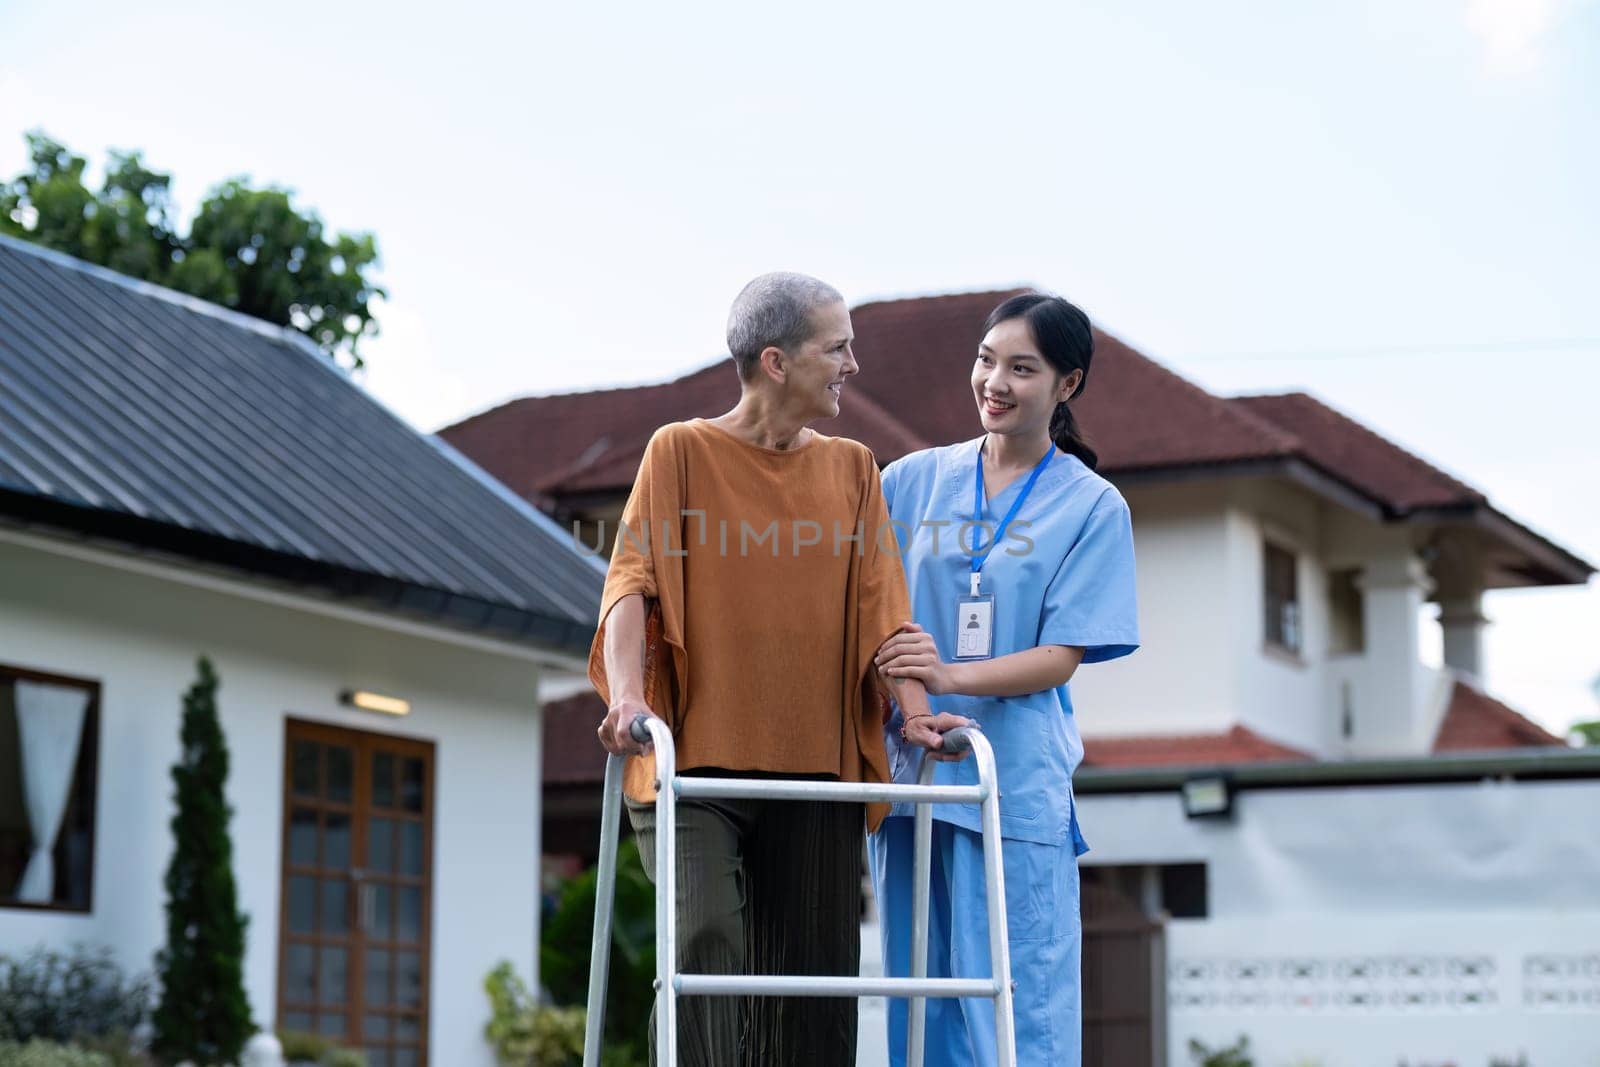 Nurse or caregiver hand on walking frame for support, help or trust moving leg in rehabilitation. Physiotherapy healthcare, Medical caregiver consulting disabled elderly patient at home.